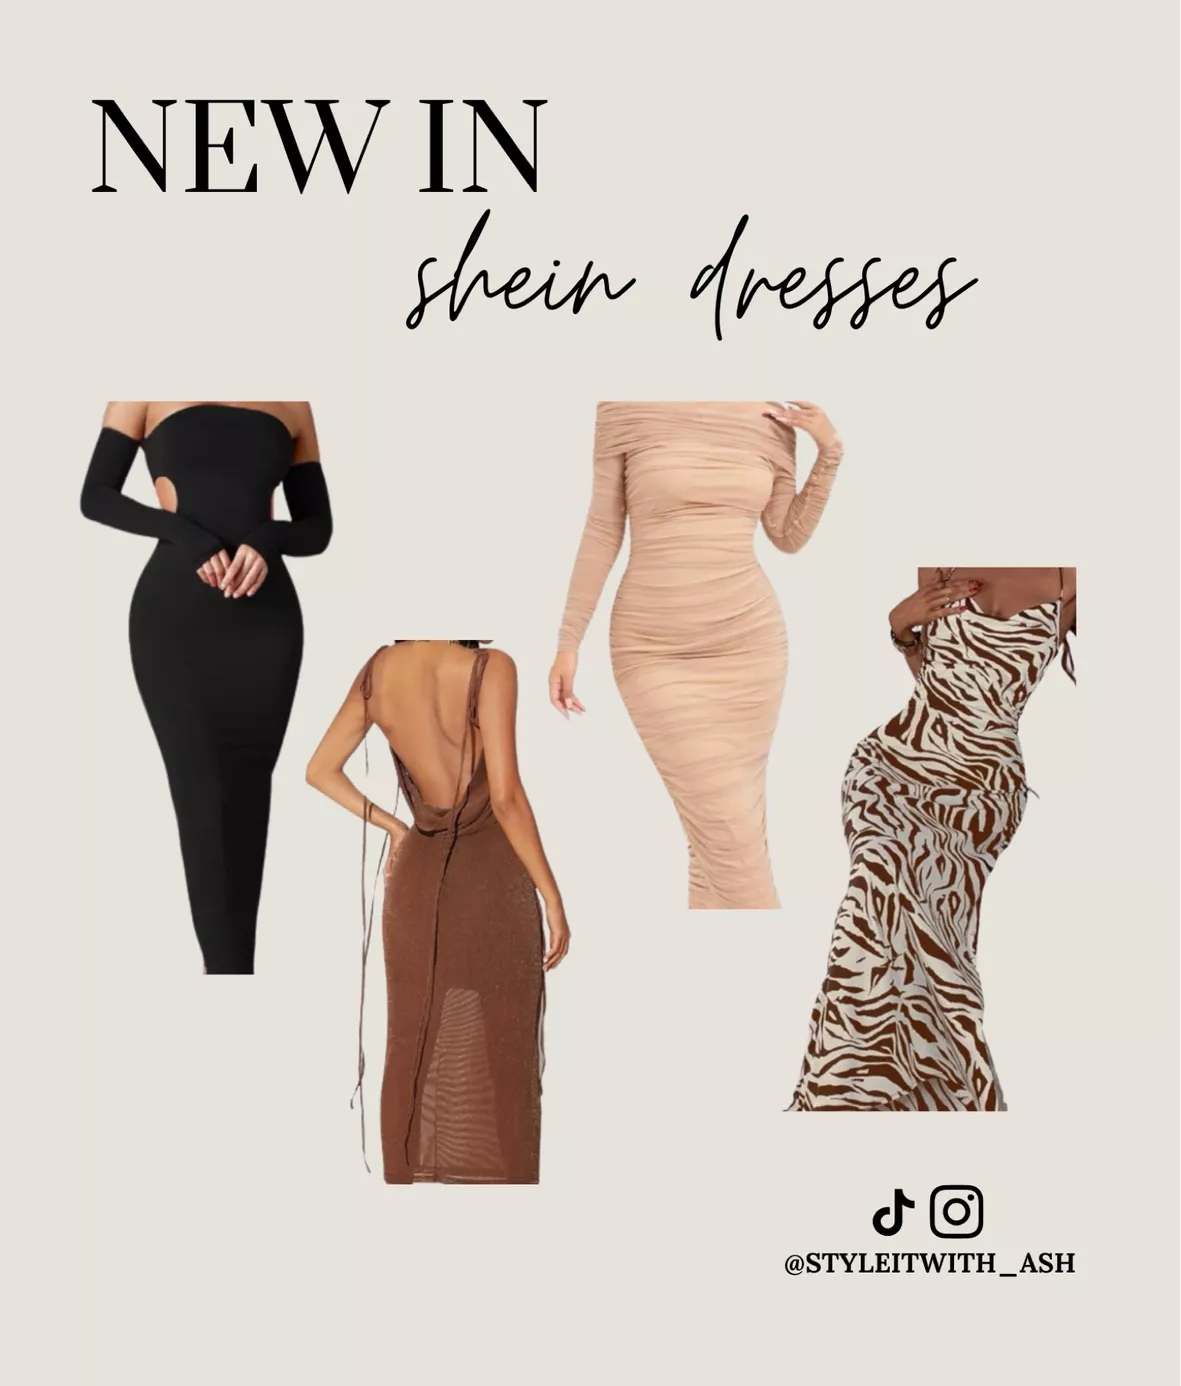 Shein Dresses  5 Shein Dresses To Ace Your Fashion Game in 2022